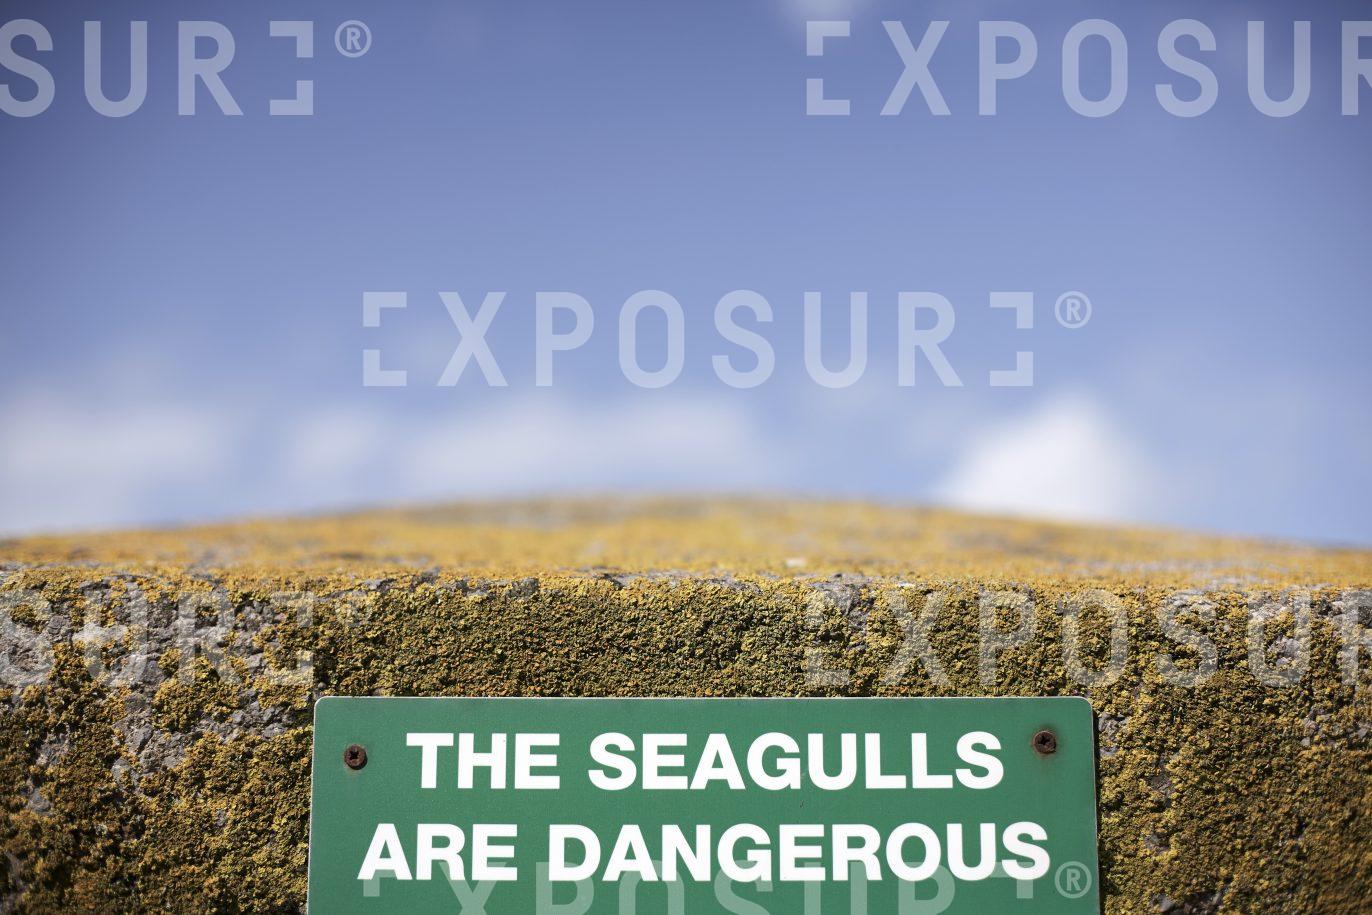 The seagulls are dangerous